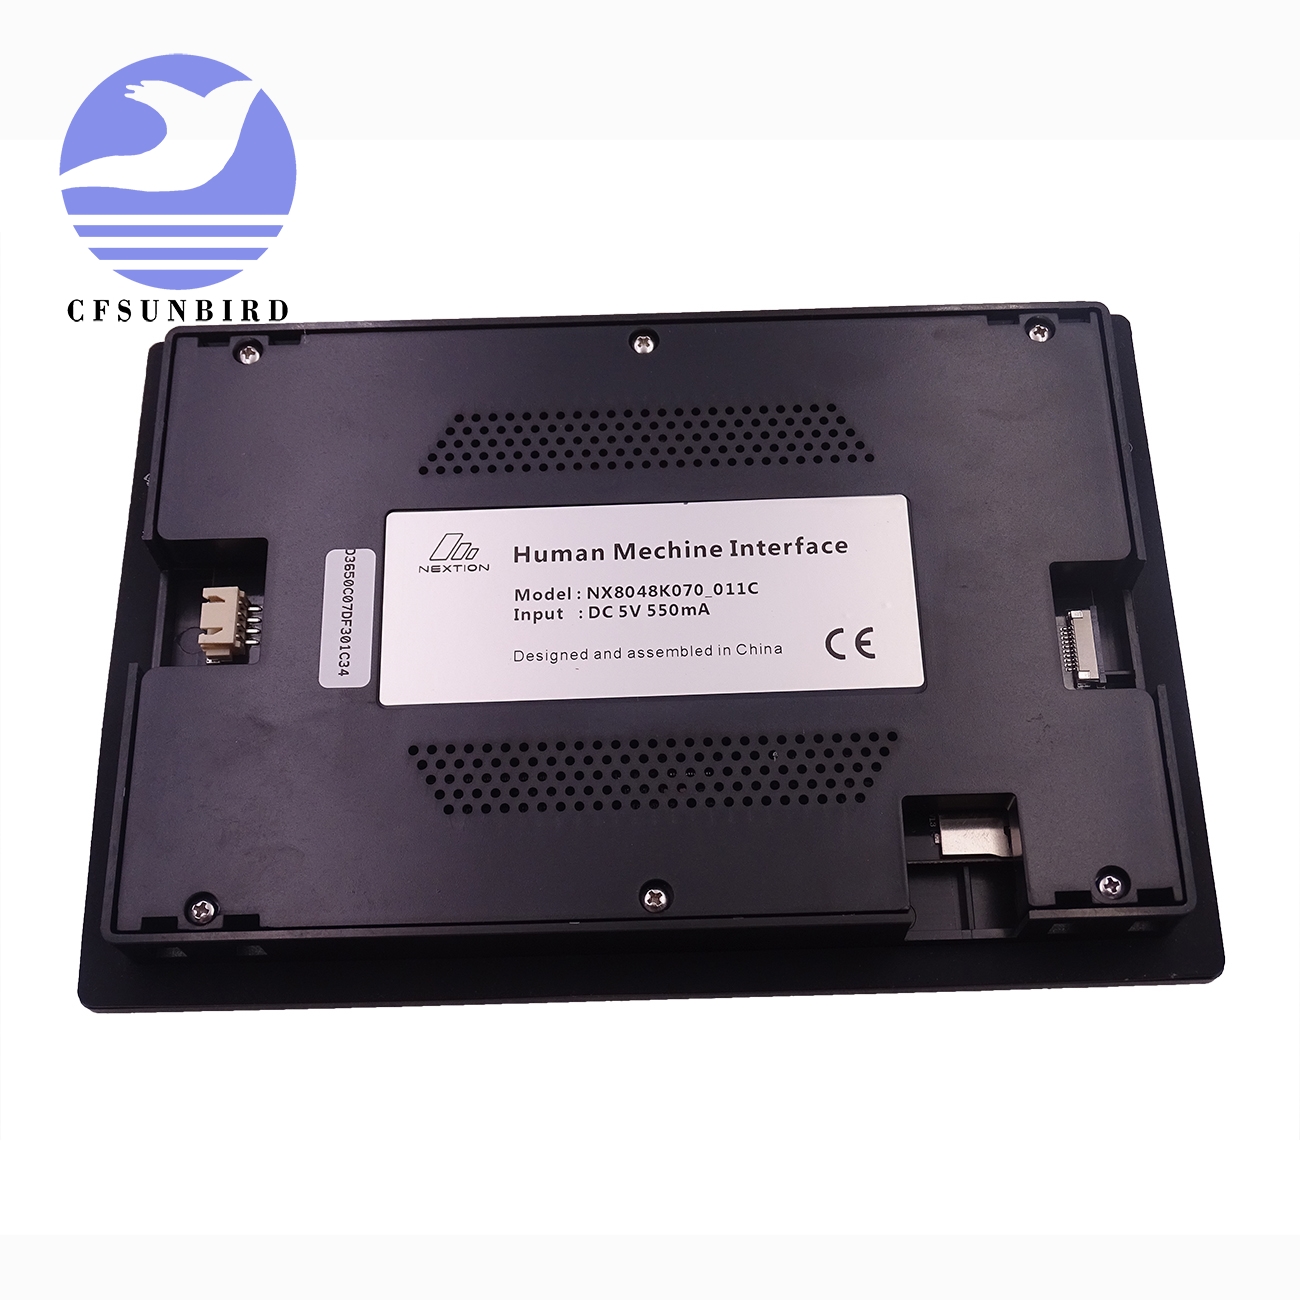 7.0" Nextion Enhanced HMI Intelligent Smart USART UART Serial TFT LCD Module Display Capacitive Multi-Touch Panel w/ Enclosure